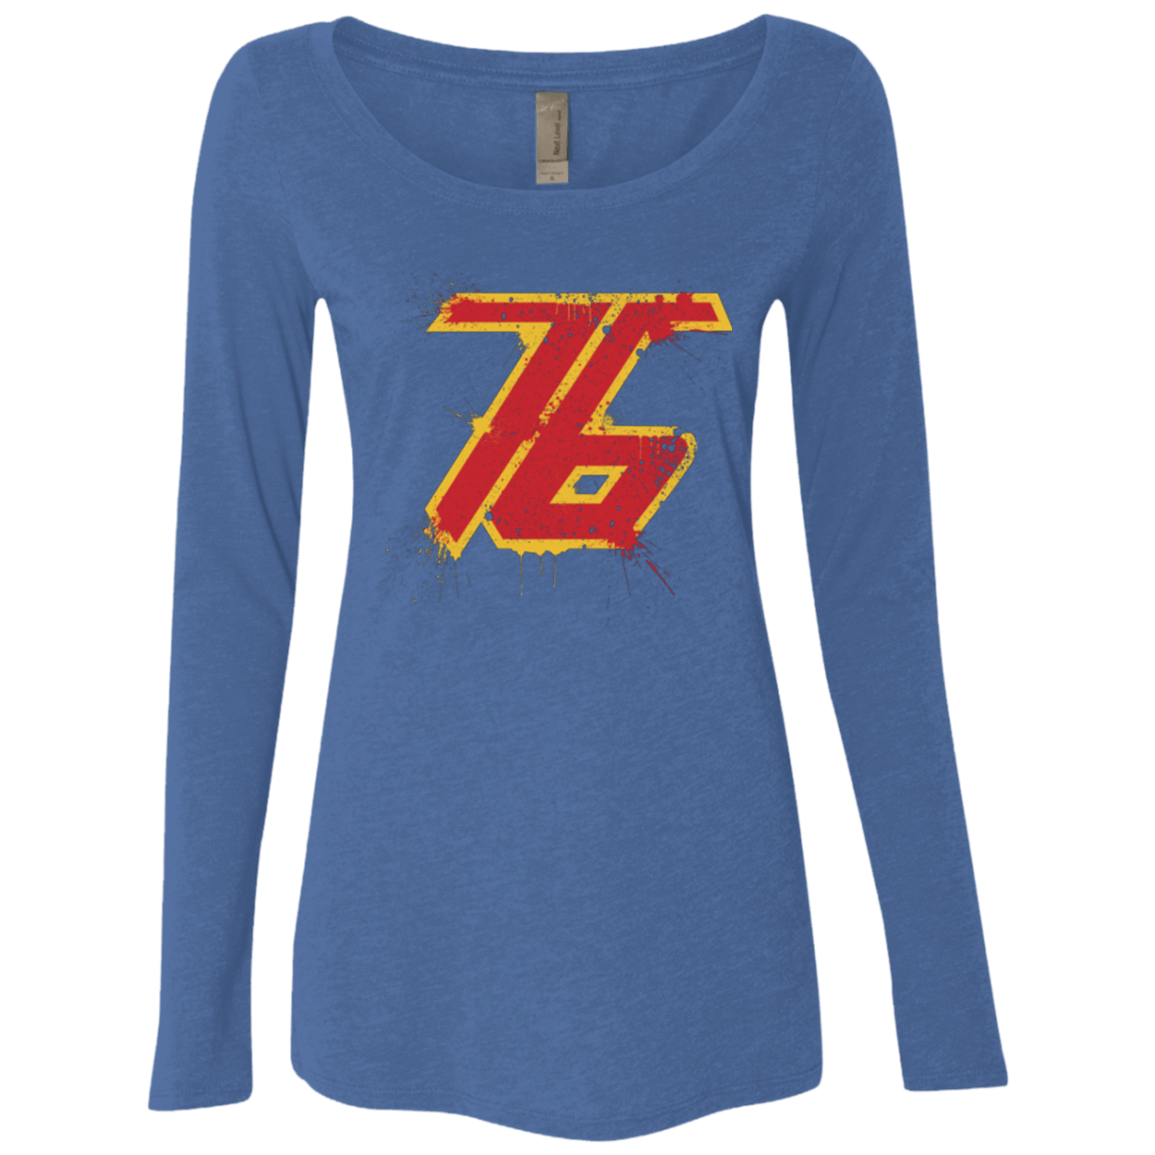 T-Shirts Vintage Royal / Small Soldier 76 Women's Triblend Long Sleeve Shirt